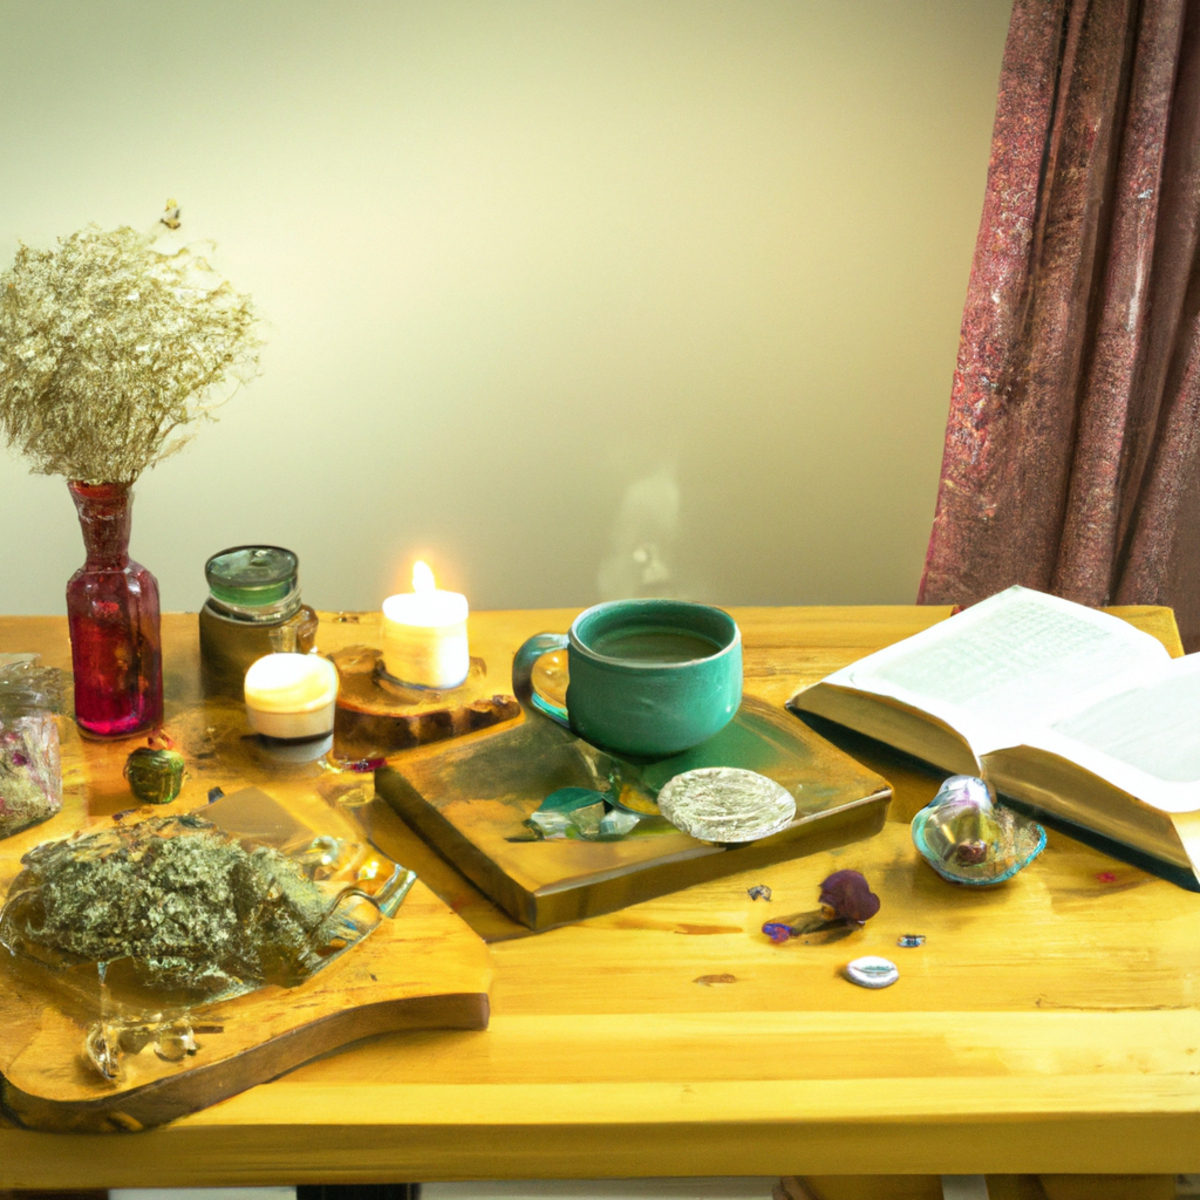 Cozy corner with wooden table, tea, journal, plant, books, and soft light, promoting self-care and personal growth.